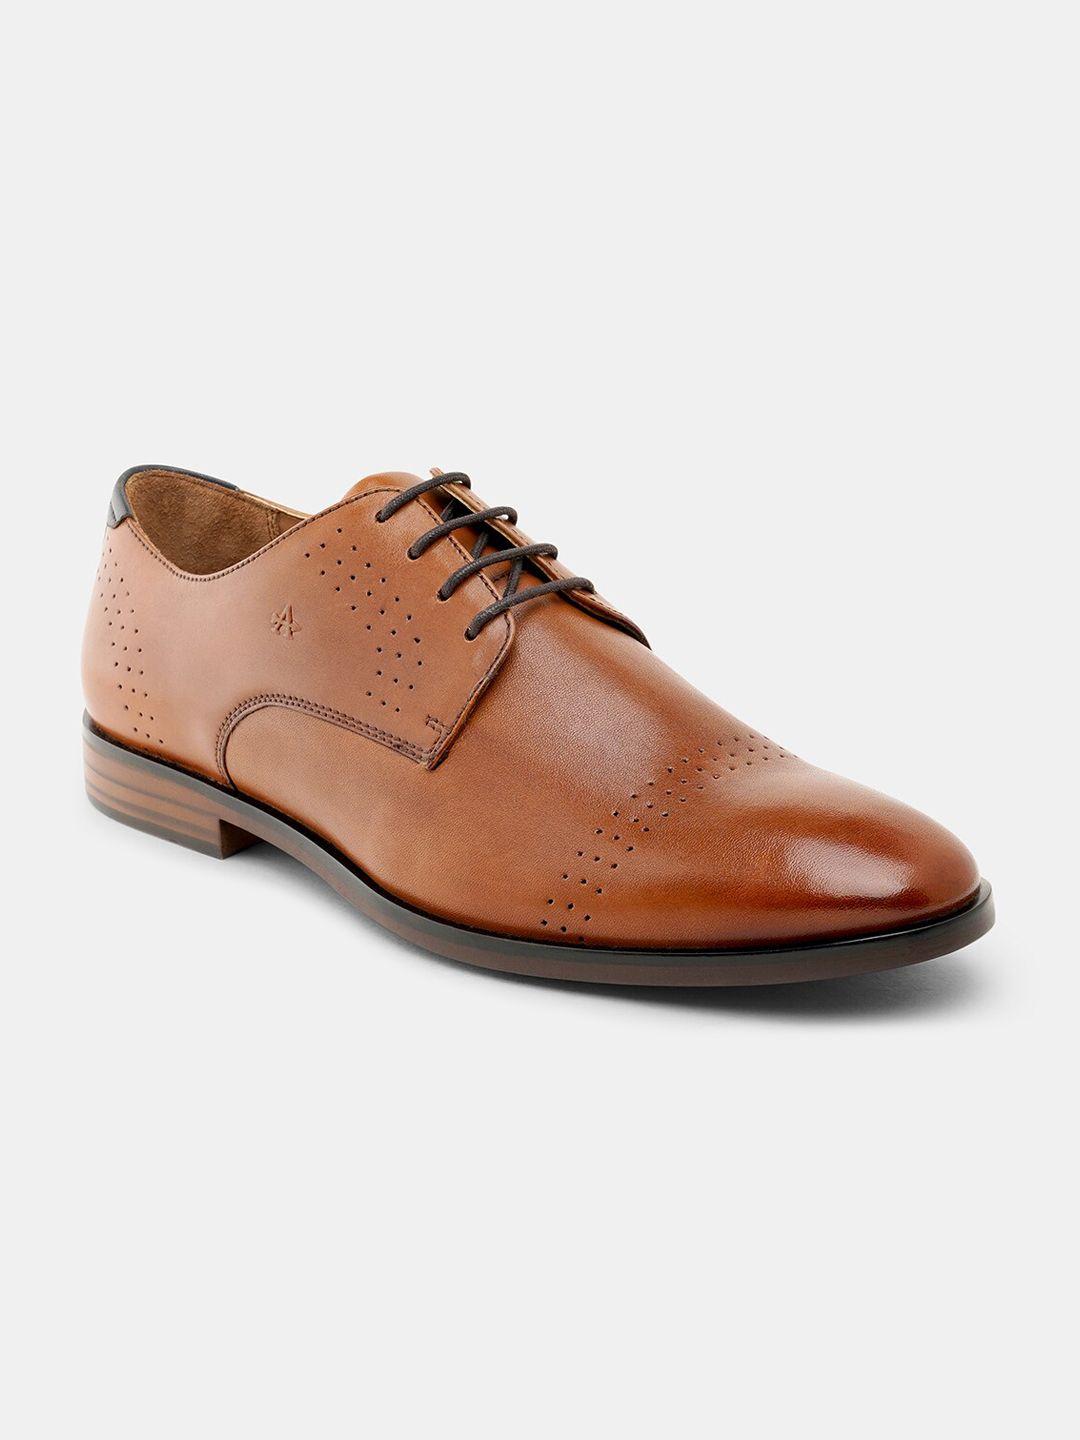 arrow-men-perforated-leather-formal-derbys